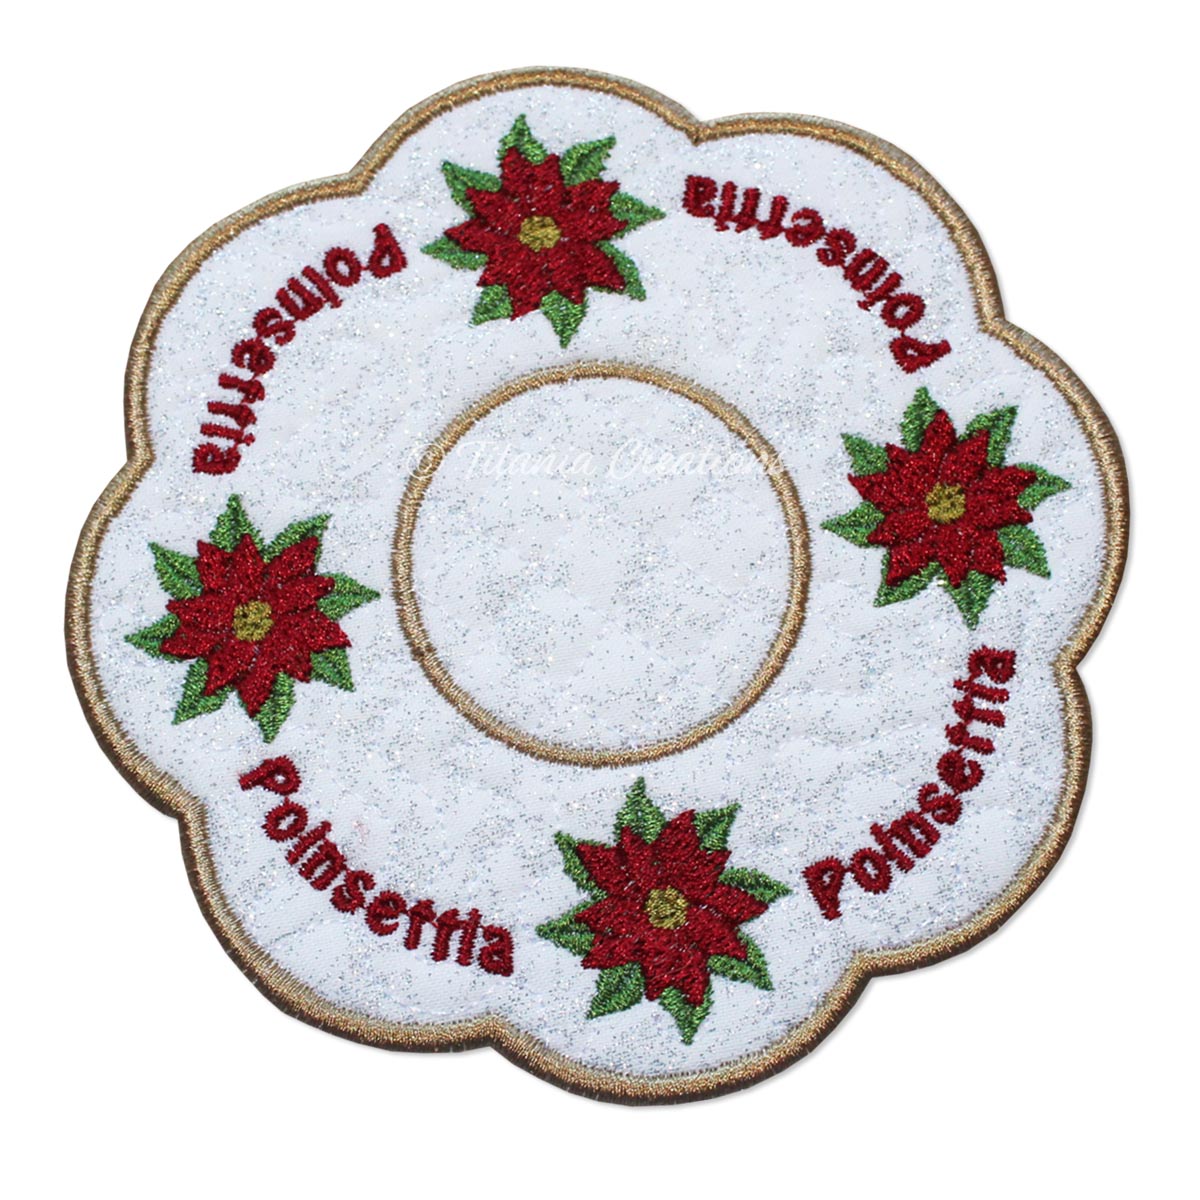 ITH Poinsettia Flower for December Candle Mat 5x5 6x6 7x7 8x8